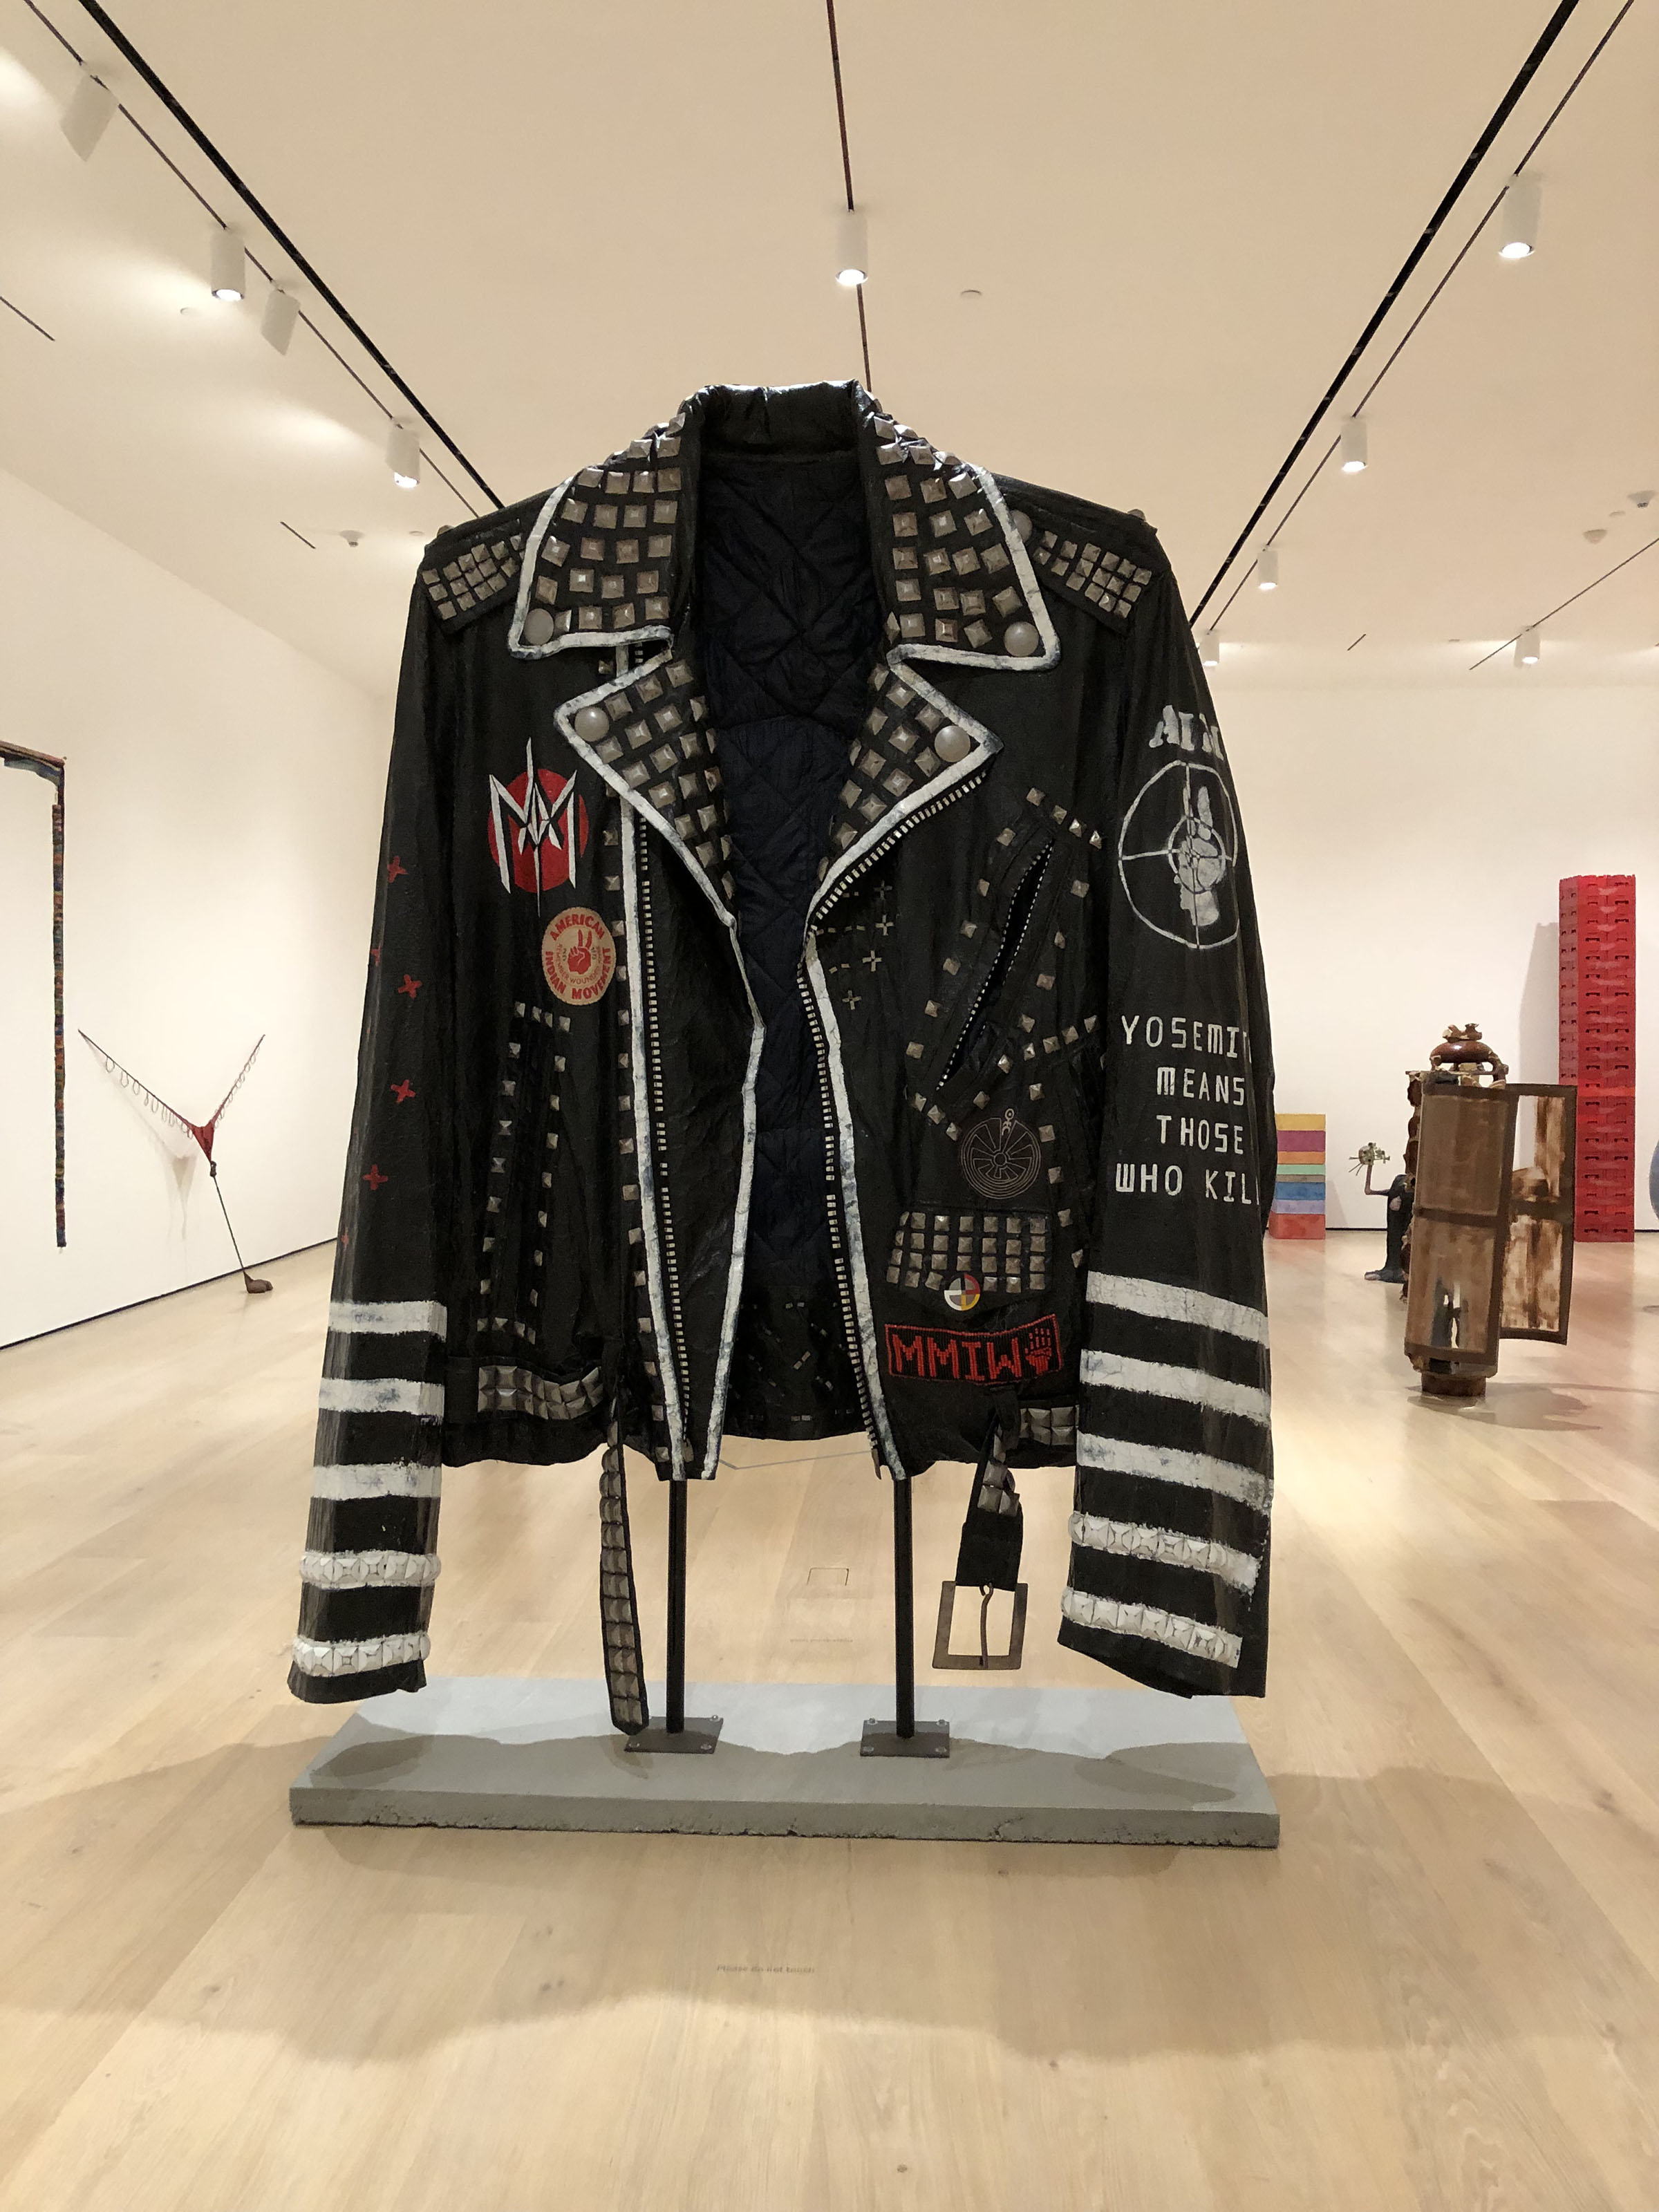 Hypebeast resale culture rises in prominence at Whitman – The